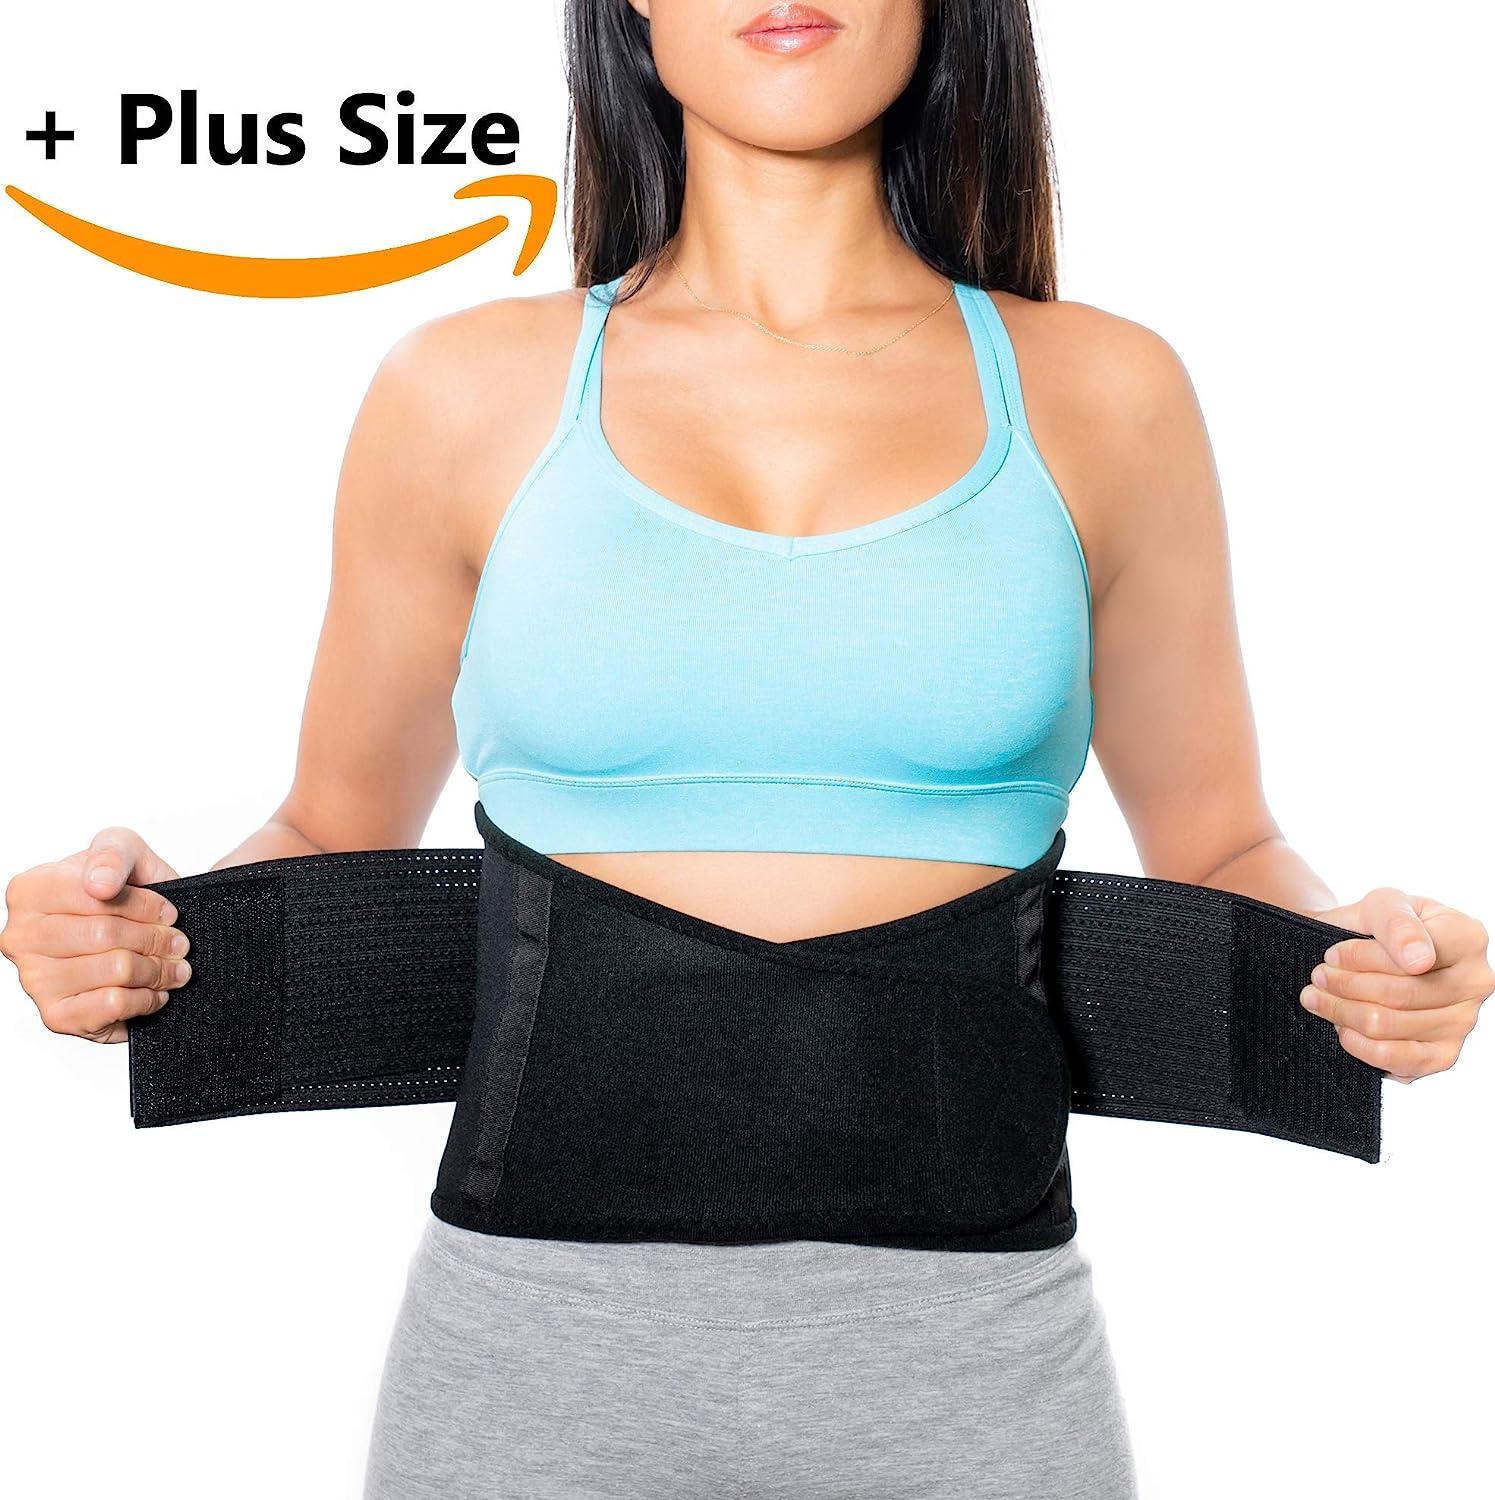 Back Brace Big & Tall Lumbar Support for Obesity - Plus Size 3XL or 6XL